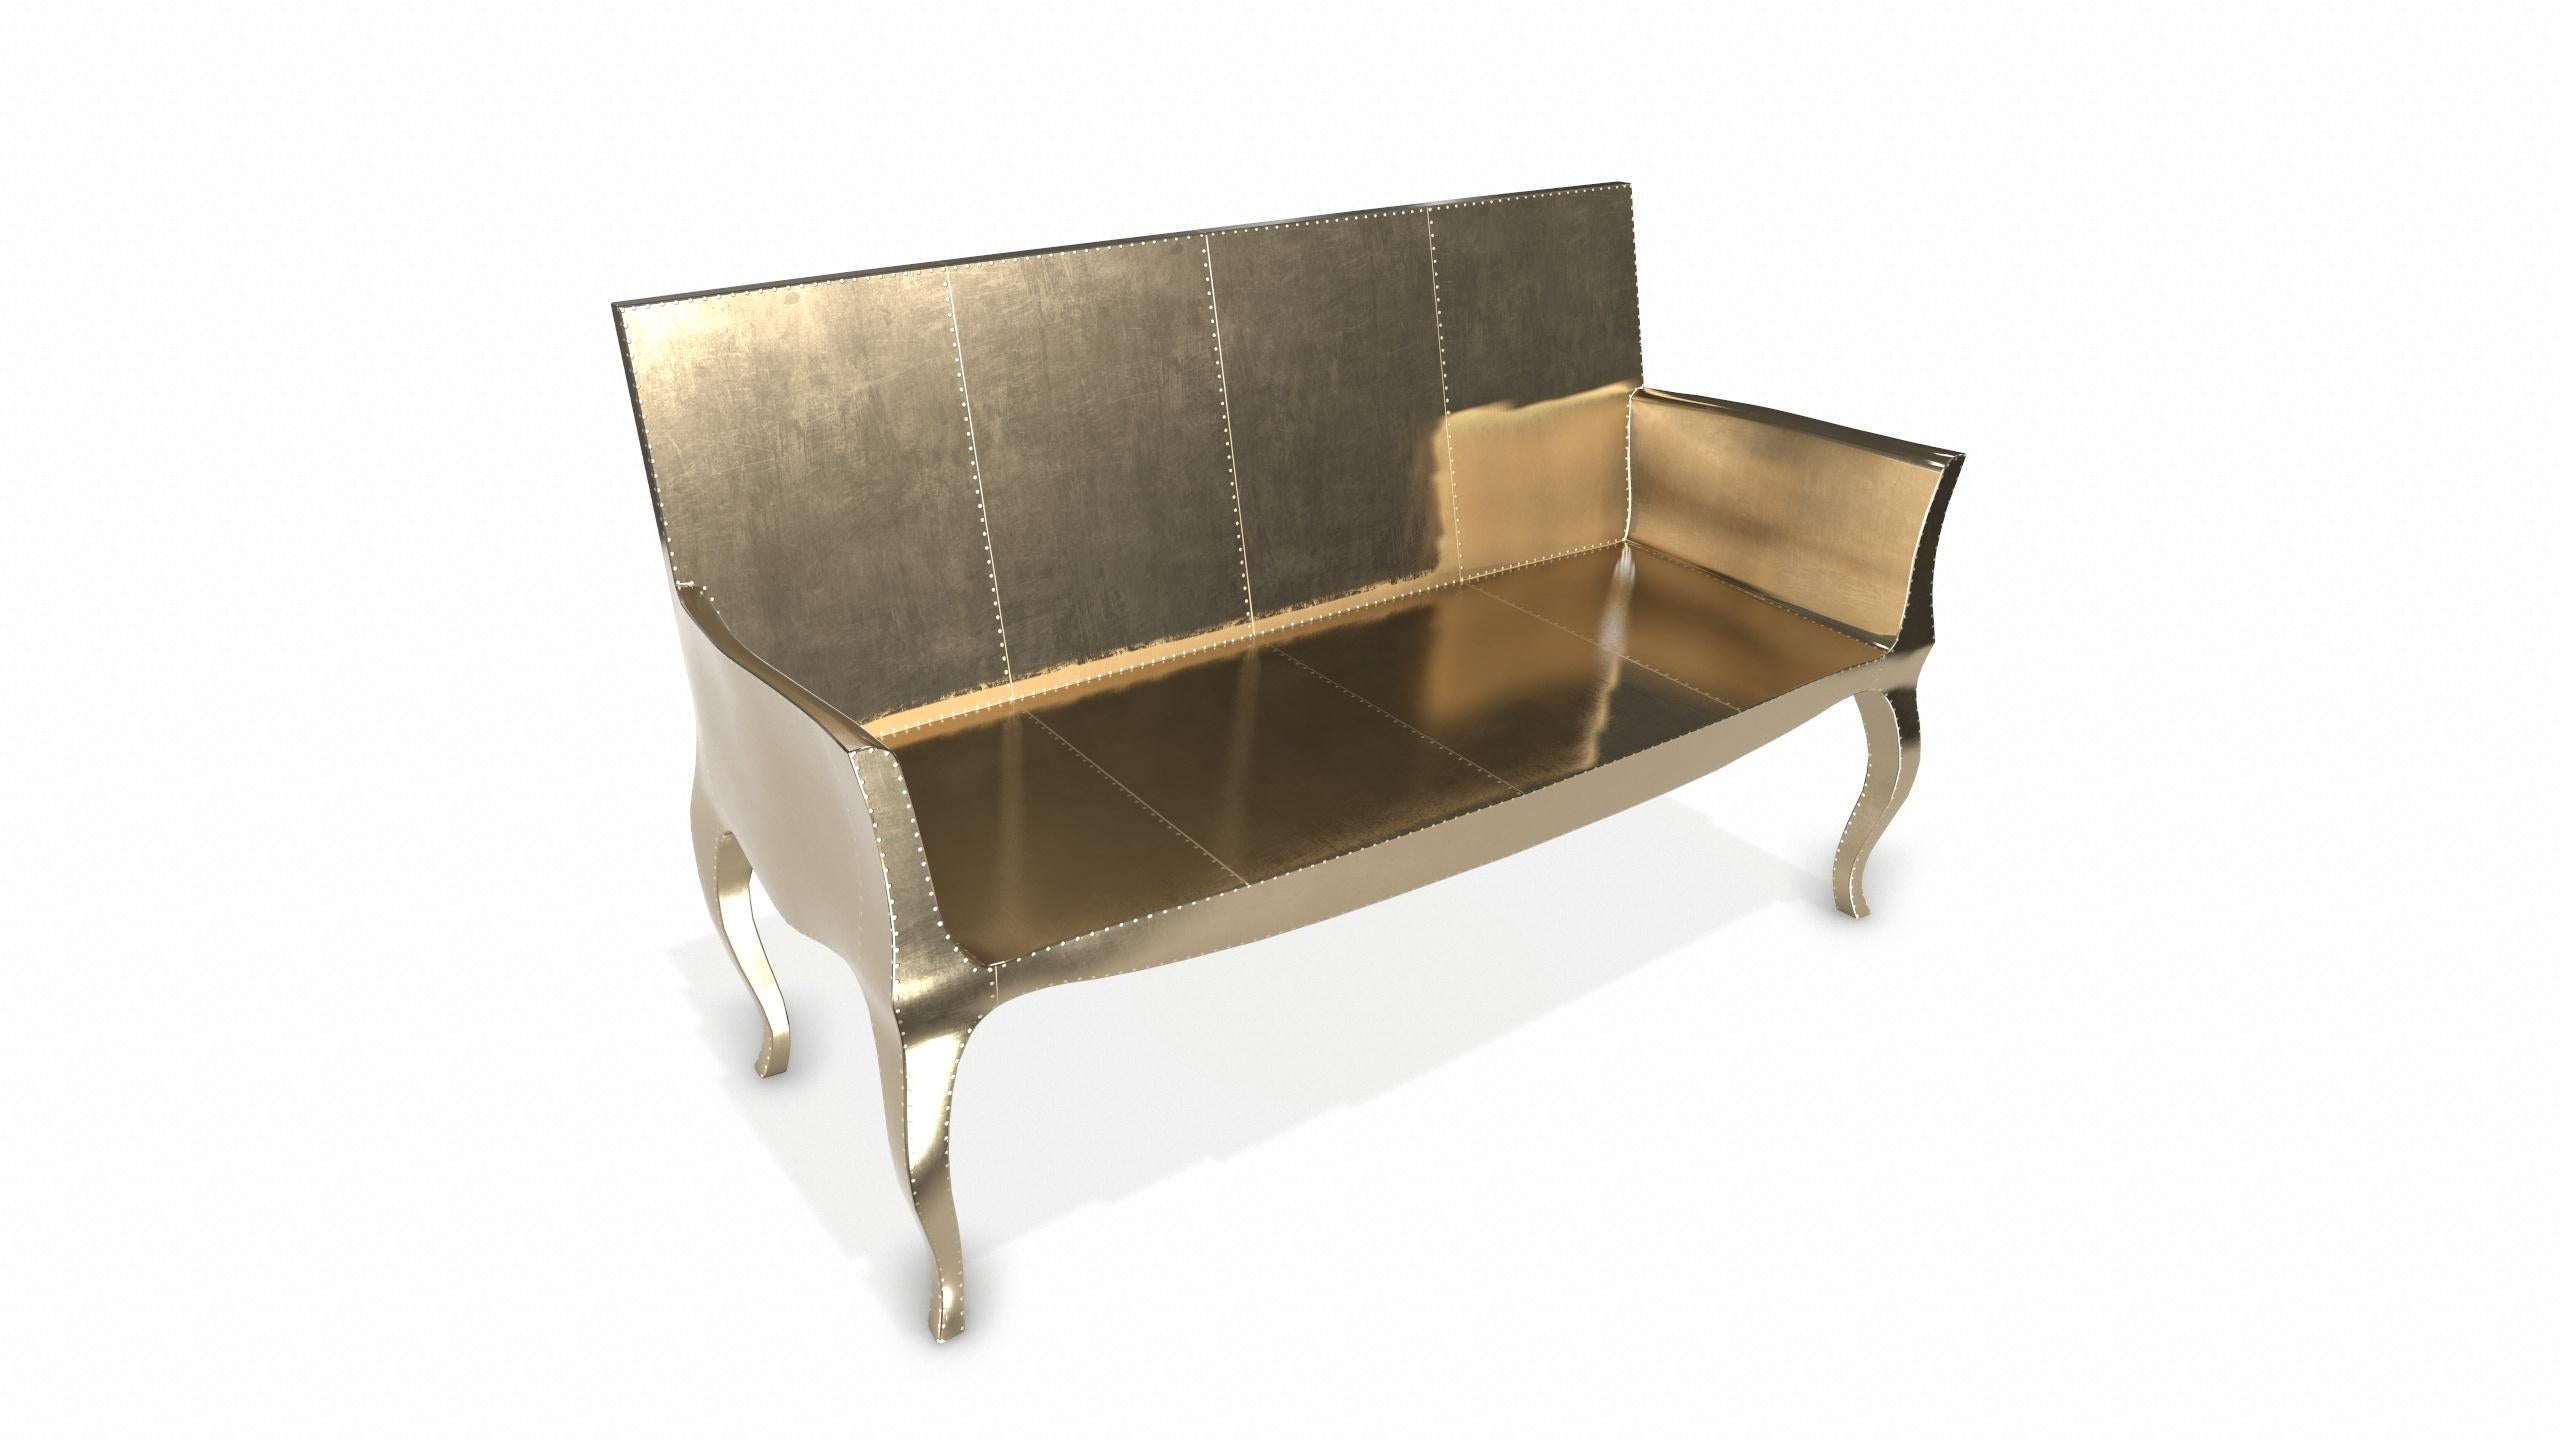 Louise Settee Art Deco Chaise Longues in Smooth Brass by Paul Mathieu For Sale 2